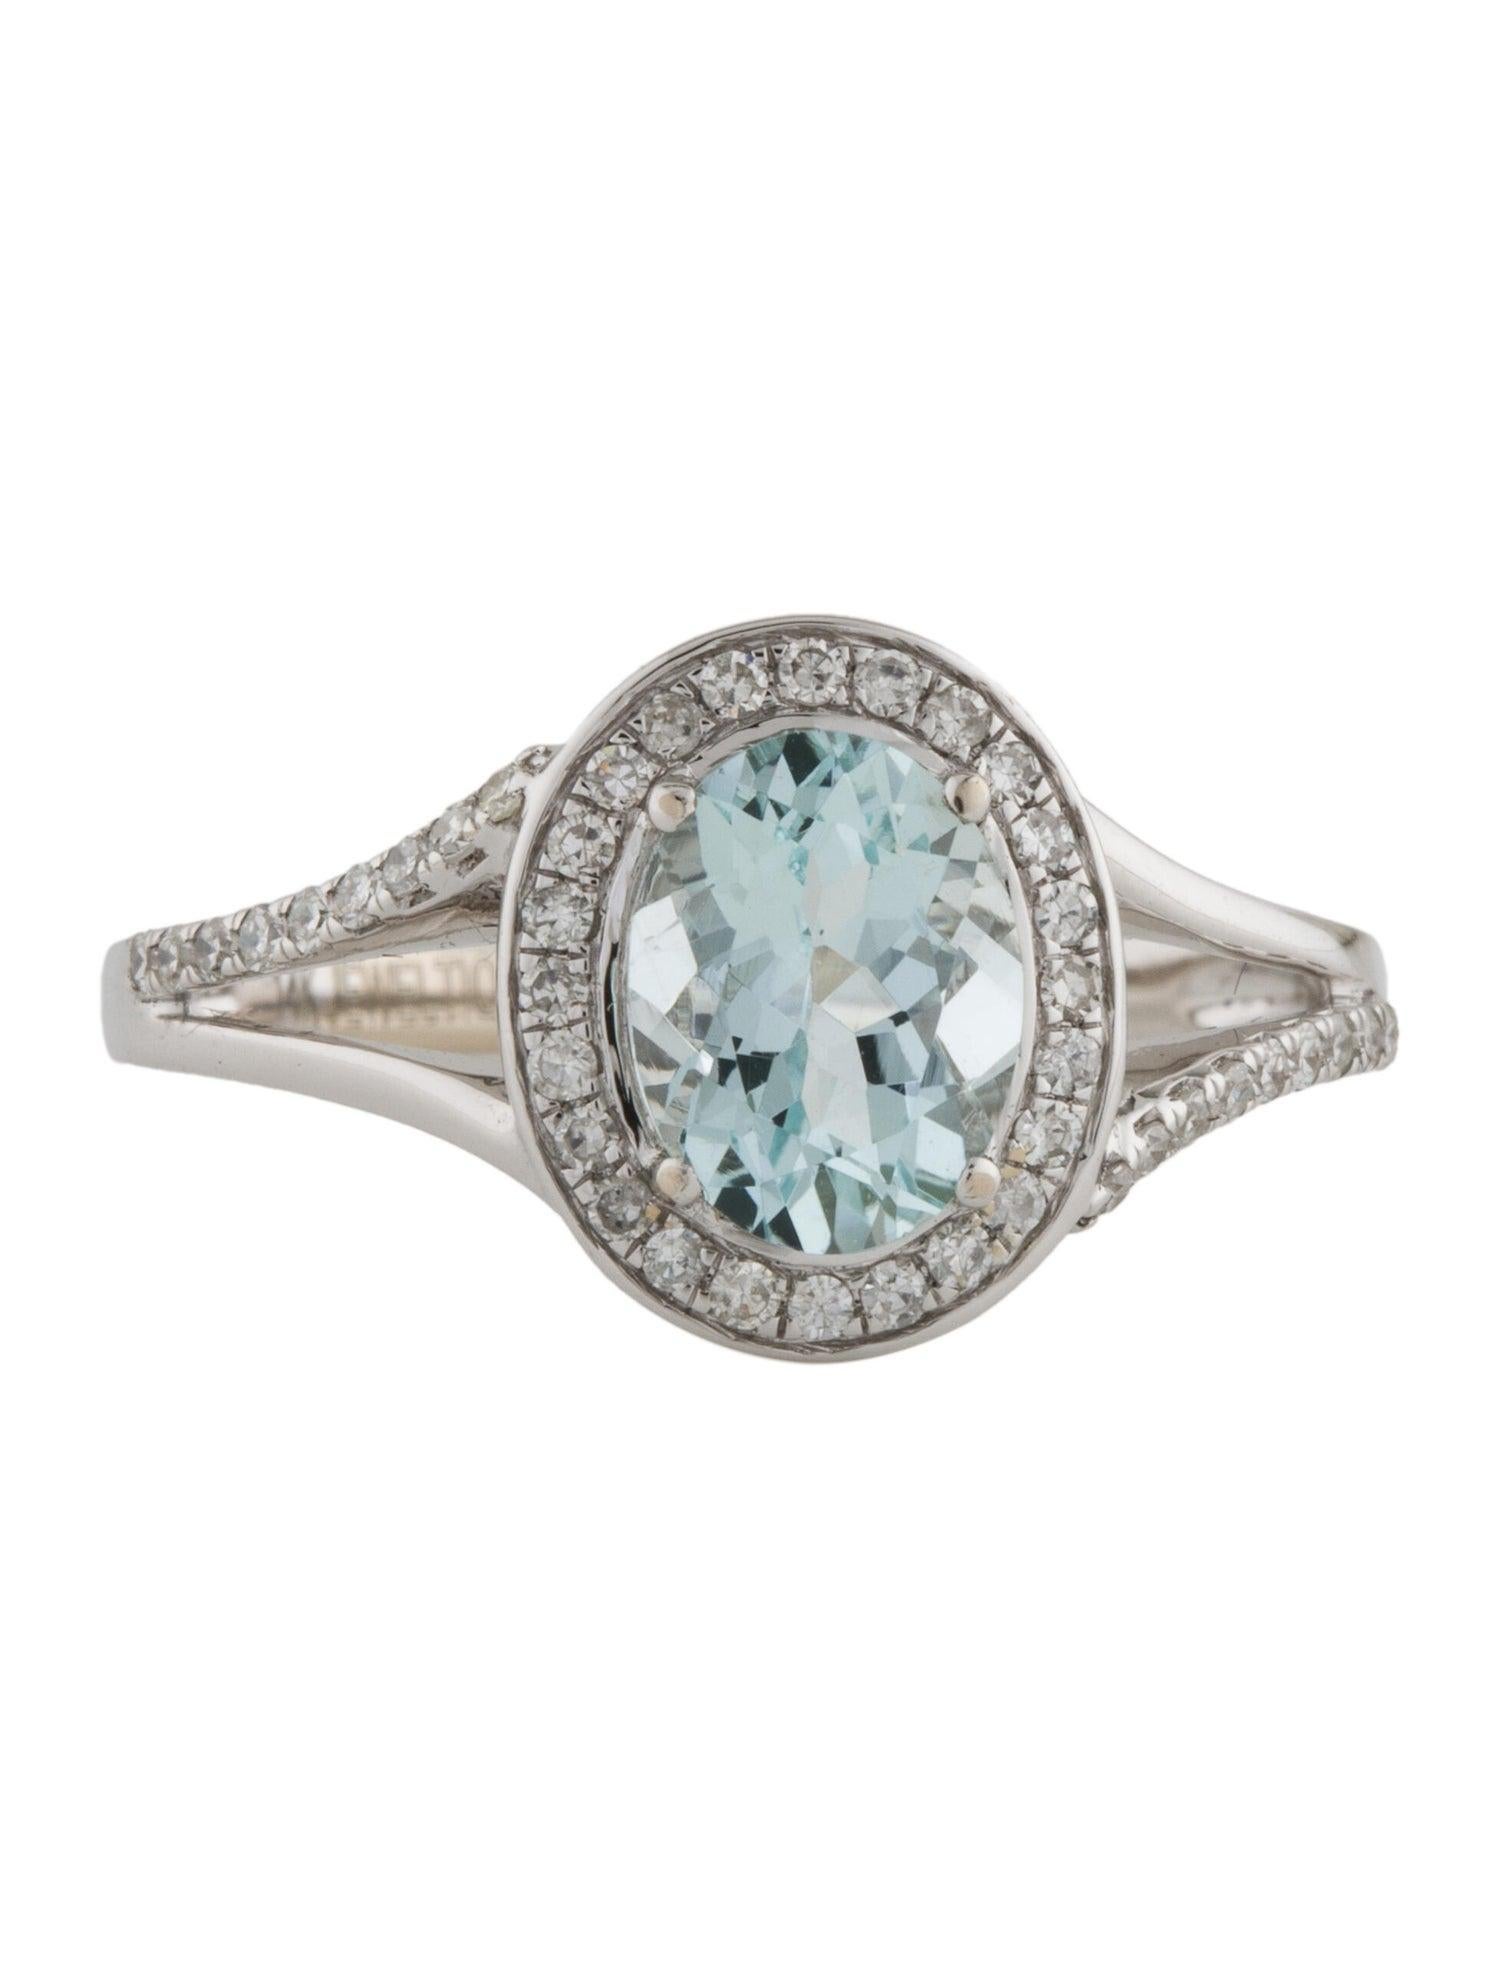 Dive into the tranquil beauty of the ocean with our Seaside Serenity Aquamarine and Diamond Ring, a captivating piece inspired by the soothing blue hues of aquamarine. Crafted with precision and care by Jeweltique, a brand with over 50 years of